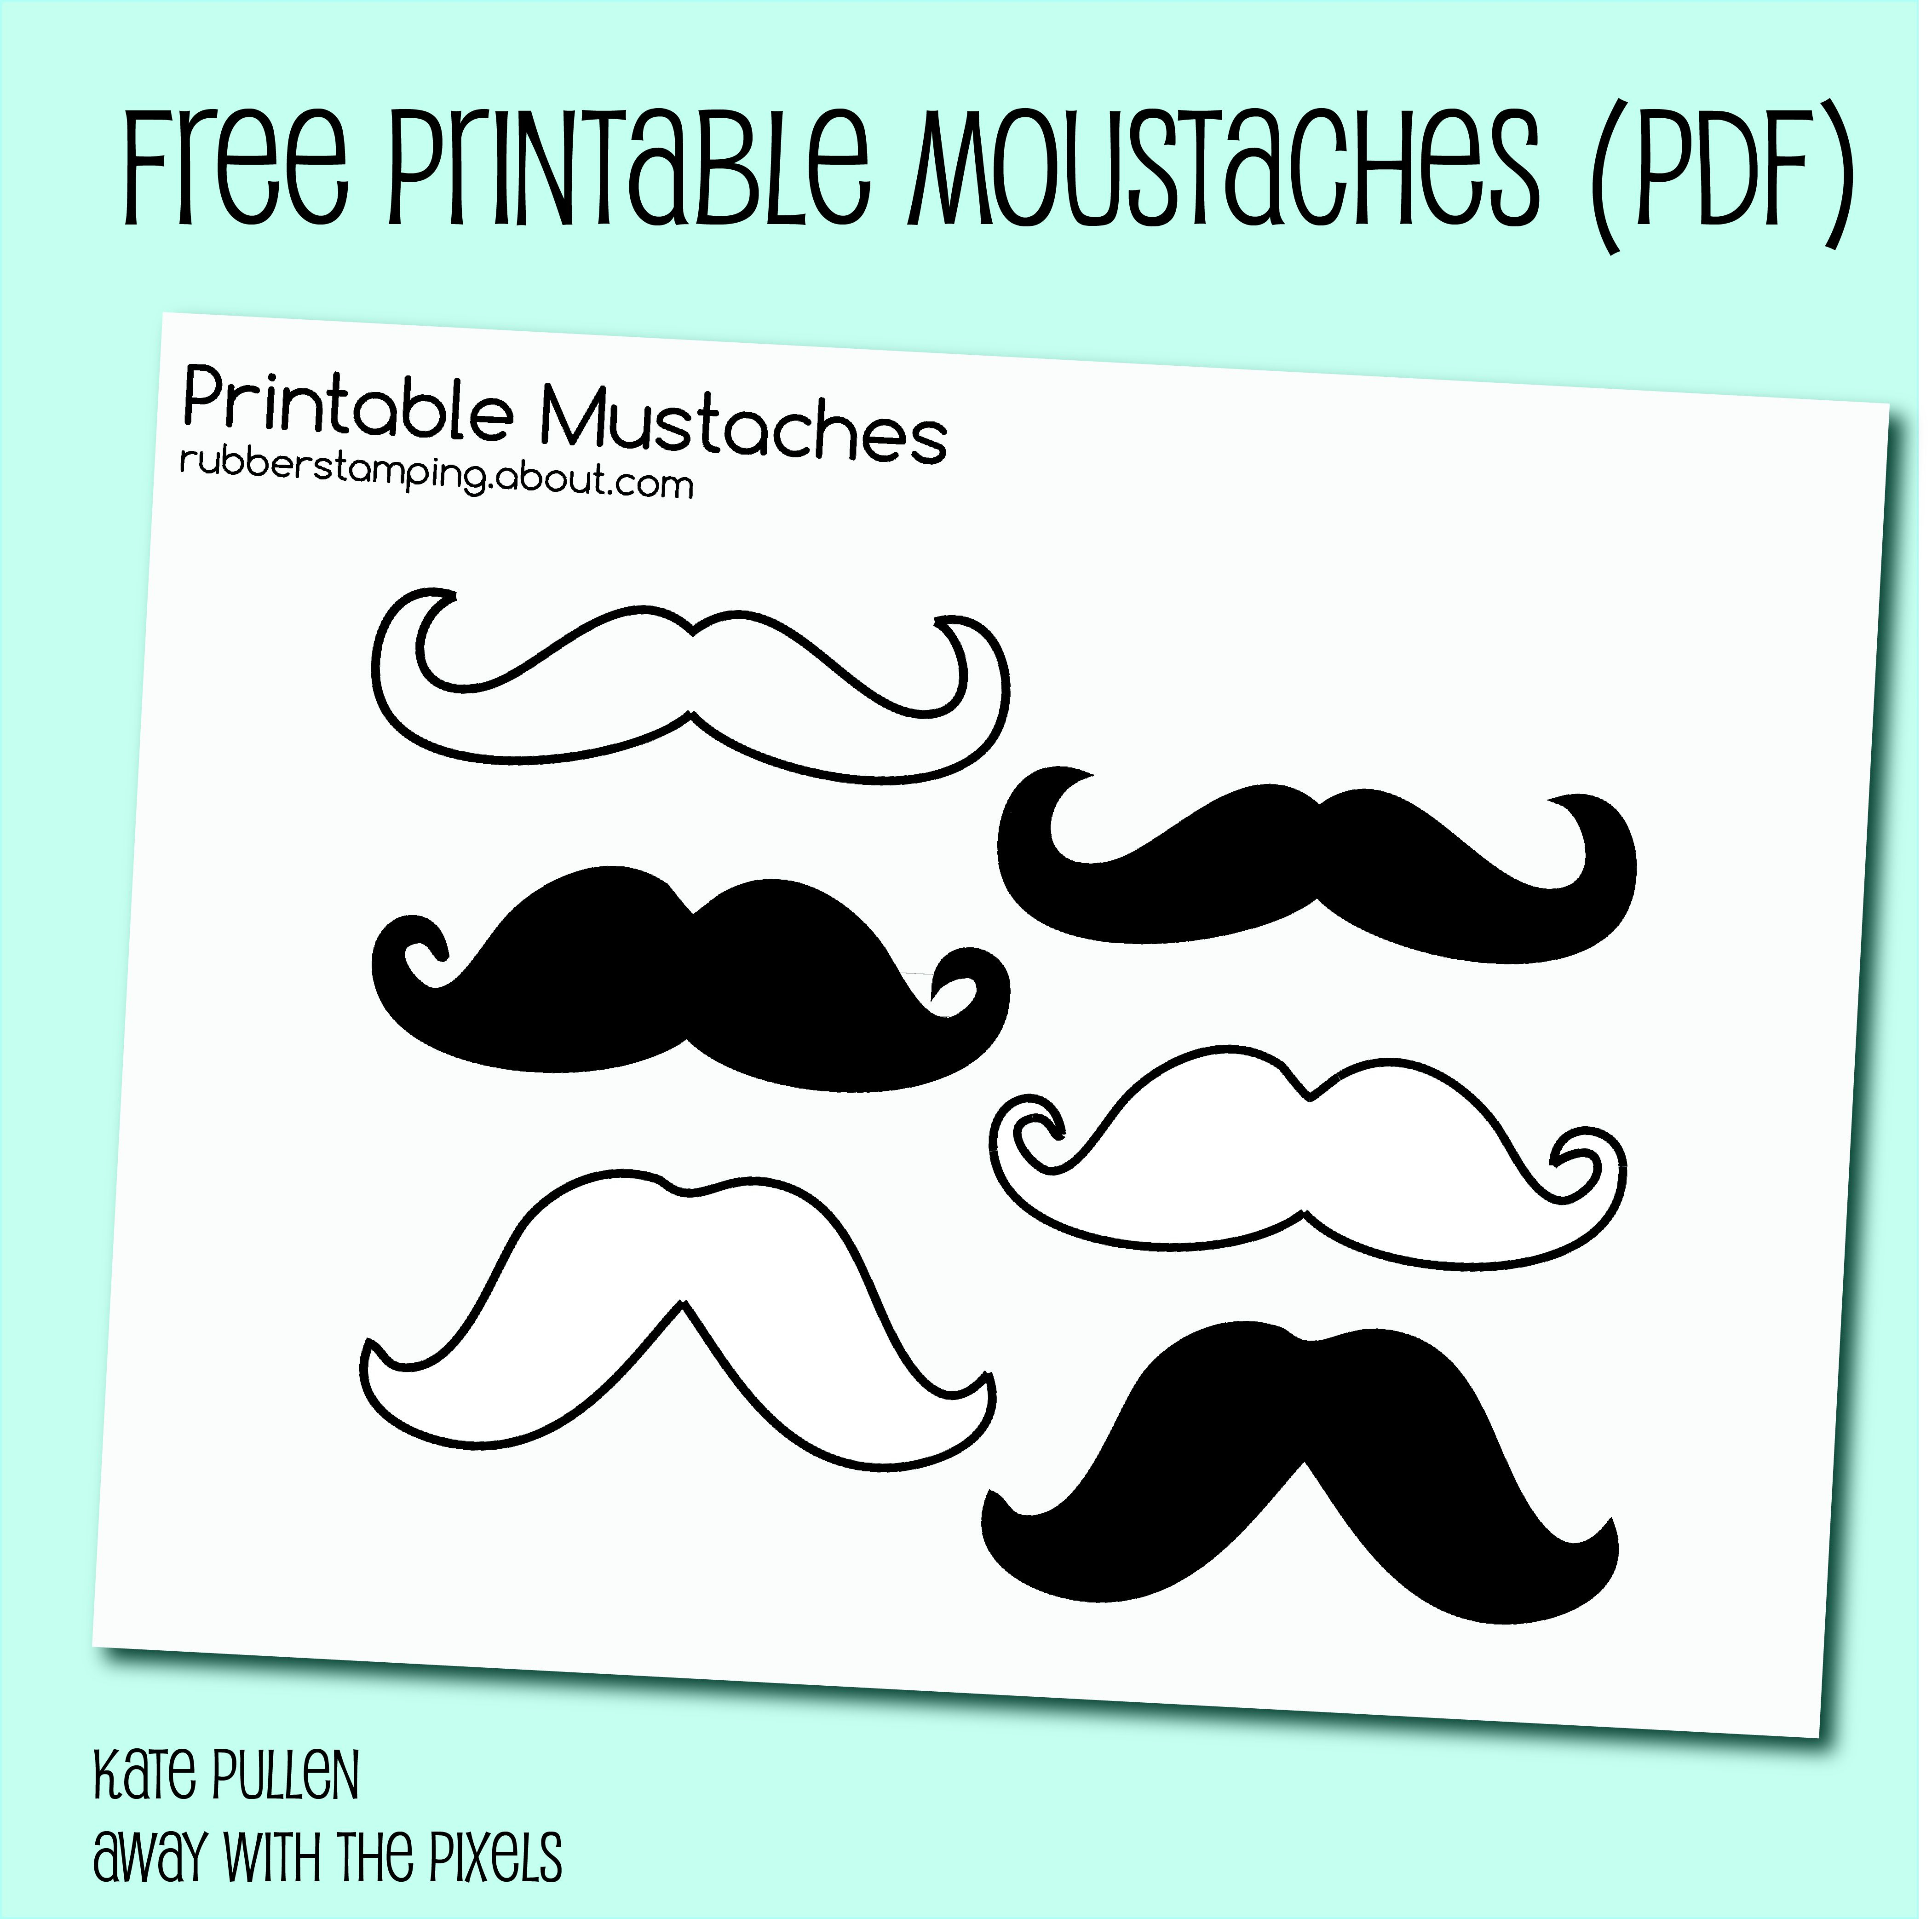 Free Printable Mustache Images - Free Printable Mustache